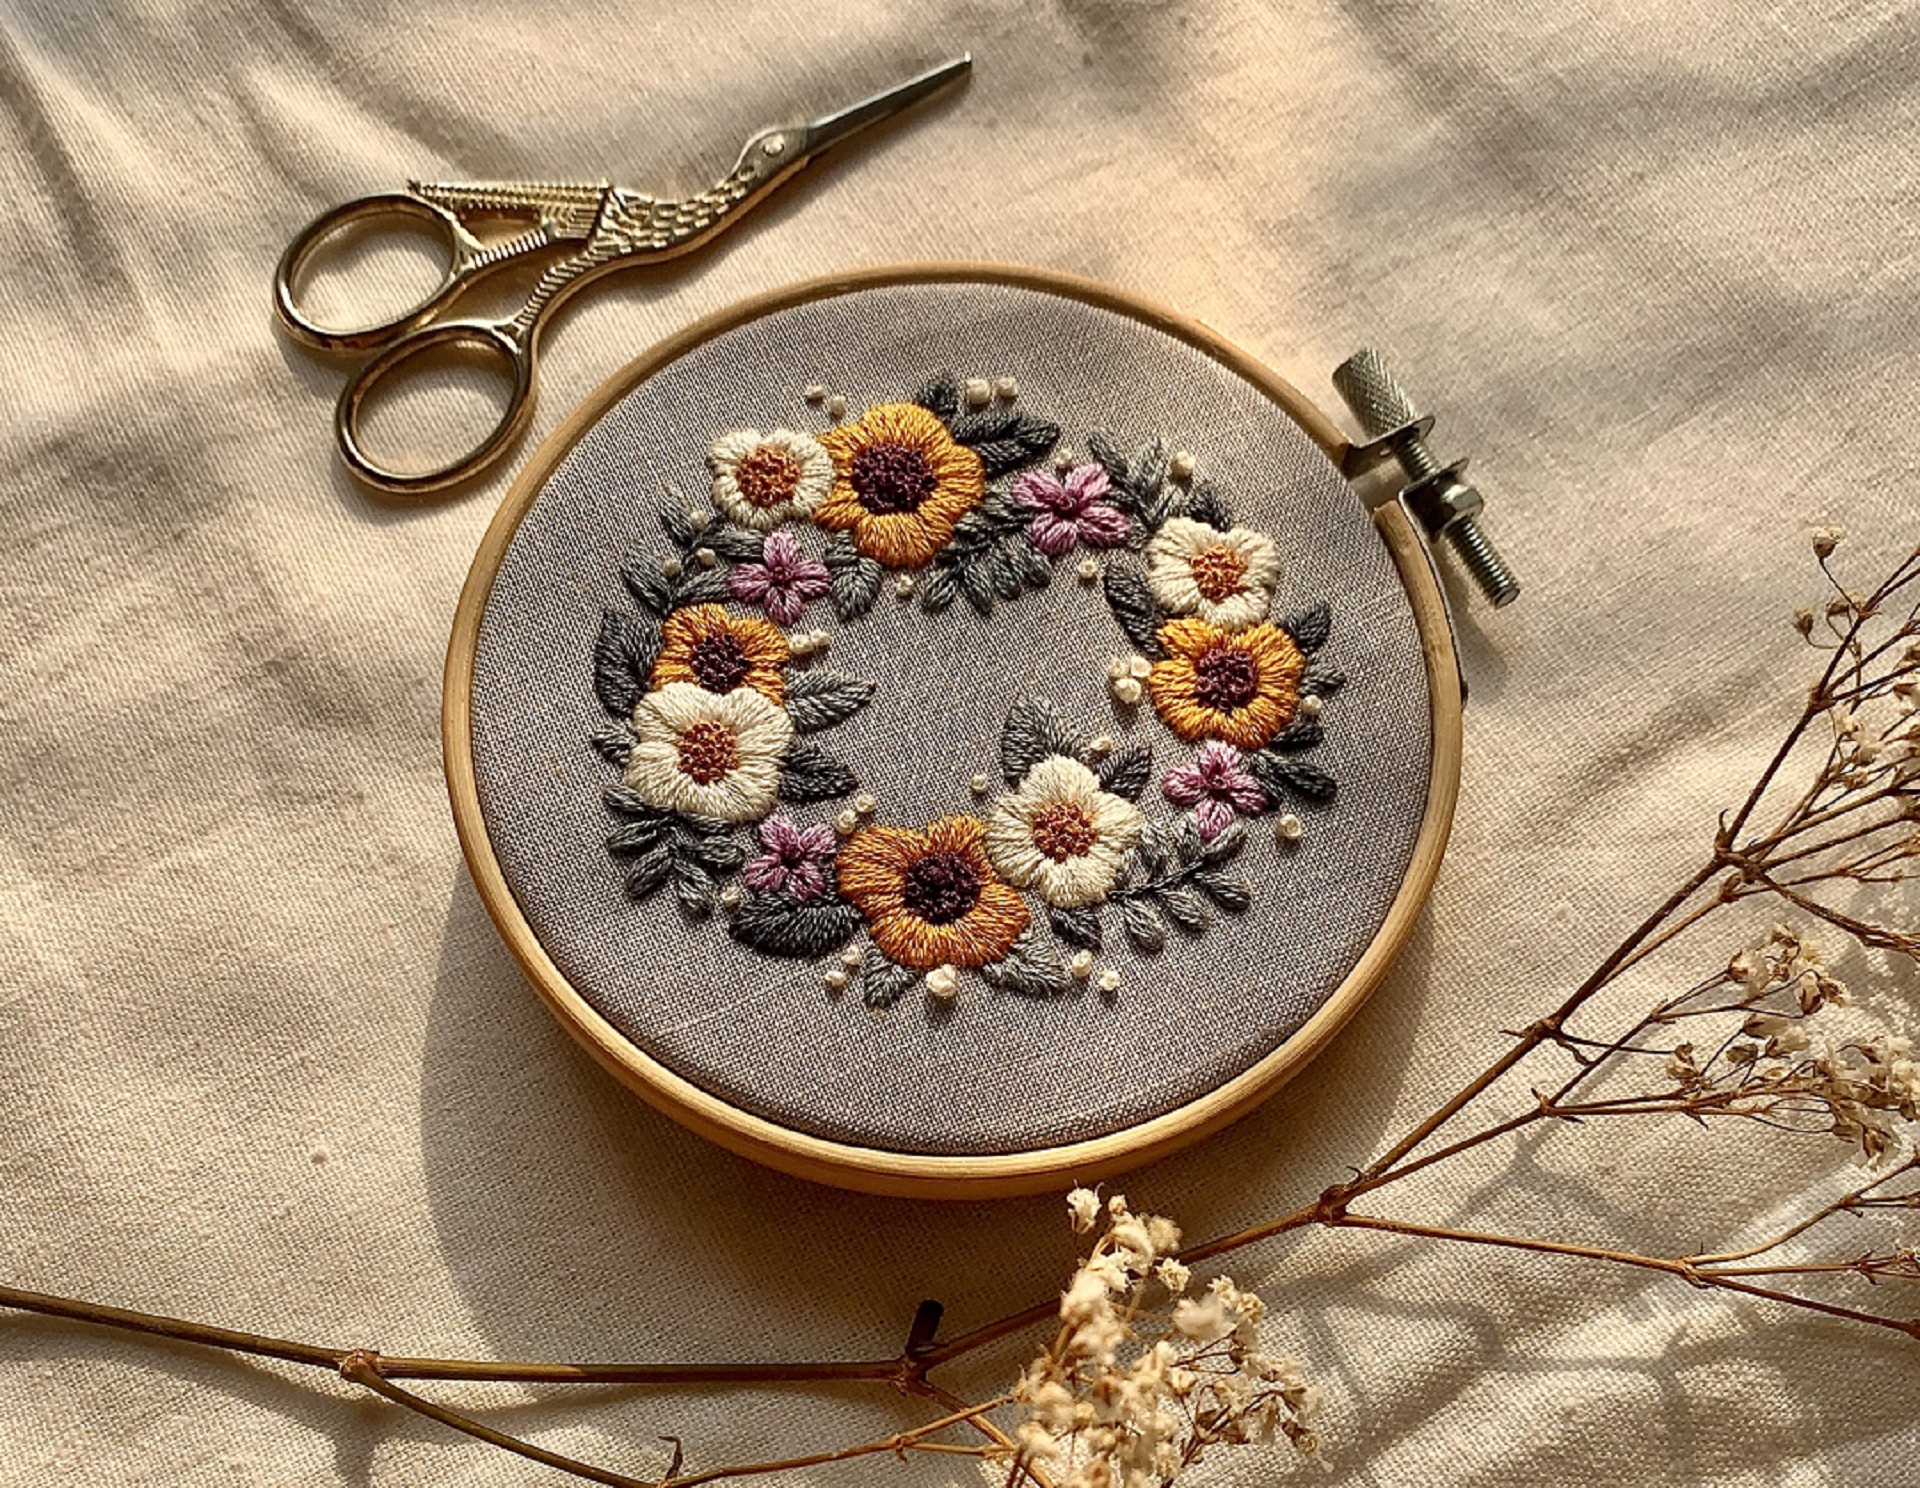 Hand Embroidery, Meditation and Zero Waste Lifestyle